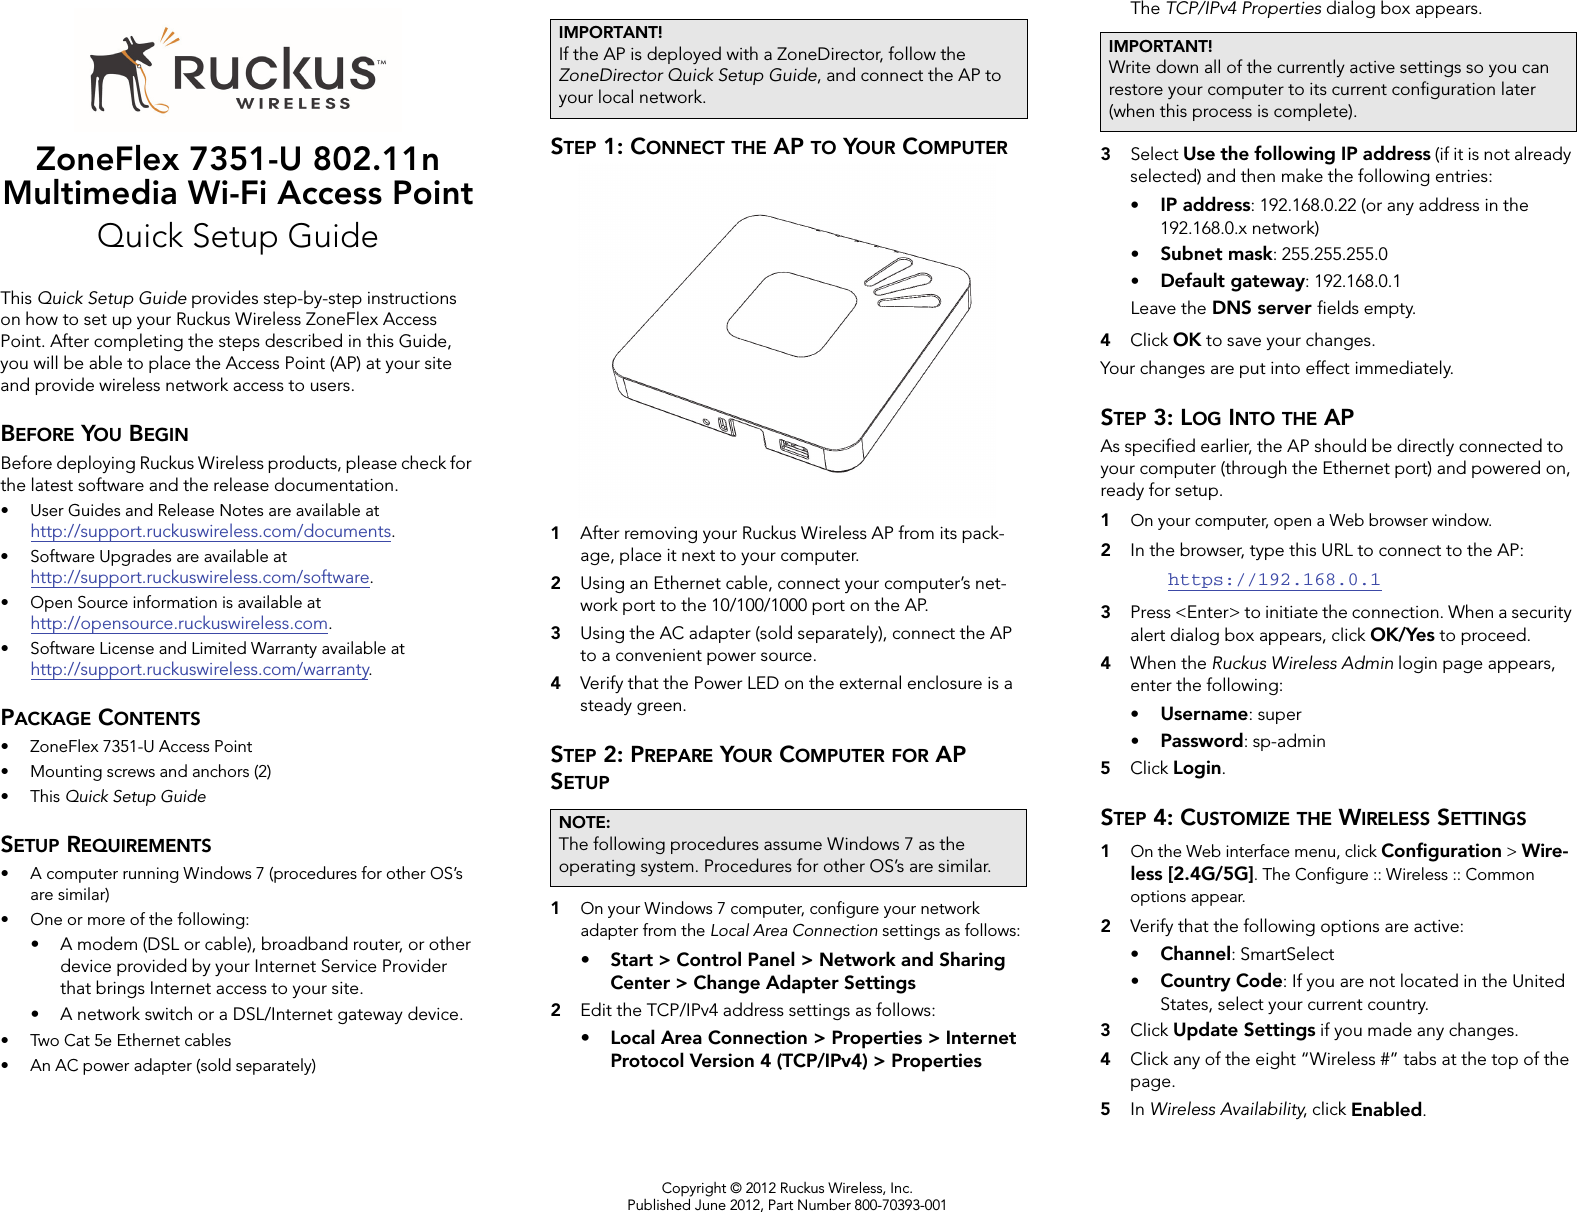 Copyright © 2012 Ruckus Wireless, Inc.Published June 2012, Part Number 800-70393-001ZoneFlex 7351-U 802.11n Multimedia Wi-Fi Access PointQuick Setup GuideThis Quick Setup Guide provides step-by-step instructions on how to set up your Ruckus Wireless ZoneFlex Access Point. After completing the steps described in this Guide, you will be able to place the Access Point (AP) at your site and provide wireless network access to users.BEFORE YOU BEGINBefore deploying Ruckus Wireless products, please check for the latest software and the release documentation.• User Guides and Release Notes are available at http://support.ruckuswireless.com/documents.• Software Upgrades are available athttp://support.ruckuswireless.com/software.• Open Source information is available athttp://opensource.ruckuswireless.com.• Software License and Limited Warranty available at http://support.ruckuswireless.com/warranty.PACKAGE CONTENTS• ZoneFlex 7351-U Access Point• Mounting screws and anchors (2)•This Quick Setup GuideSETUP REQUIREMENTS• A computer running Windows 7 (procedures for other OS’s are similar)• One or more of the following:• A modem (DSL or cable), broadband router, or other device provided by your Internet Service Provider that brings Internet access to your site. • A network switch or a DSL/Internet gateway device.• Two Cat 5e Ethernet cables• An AC power adapter (sold separately) STEP 1: CONNECT THE AP TO YOUR COMPUTER1After removing your Ruckus Wireless AP from its pack-age, place it next to your computer.2Using an Ethernet cable, connect your computer’s net-work port to the 10/100/1000 port on the AP. 3Using the AC adapter (sold separately), connect the AP to a convenient power source. 4Verify that the Power LED on the external enclosure is a steady green. STEP 2: PREPARE YOUR COMPUTER FOR AP SETUP1On your Windows 7 computer, configure your network adapter from the Local Area Connection settings as follows:• Start &gt; Control Panel &gt; Network and Sharing Center &gt; Change Adapter Settings2Edit the TCP/IPv4 address settings as follows: • Local Area Connection &gt; Properties &gt; Internet Protocol Version 4 (TCP/IPv4) &gt; PropertiesThe TCP/IPv4 Properties dialog box appears.3Select Use the following IP address (if it is not already selected) and then make the following entries:•IP address: 192.168.0.22 (or any address in the 192.168.0.x network)•Subnet mask: 255.255.255.0•Default gateway: 192.168.0.1Leave the DNS server fields empty.4Click OK to save your changes.Your changes are put into effect immediately. STEP 3: LOG INTO THE APAs specified earlier, the AP should be directly connected to your computer (through the Ethernet port) and powered on, ready for setup.1On your computer, open a Web browser window.2In the browser, type this URL to connect to the AP: https://192.168.0.13Press &lt;Enter&gt; to initiate the connection. When a security alert dialog box appears, click OK/Yes to proceed.4When the Ruckus Wireless Admin login page appears, enter the following: •Username: super•Password: sp-admin5Click Login.STEP 4: CUSTOMIZE THE WIRELESS SETTINGS1On the Web interface menu, click Configuration &gt; Wire-less [2.4G/5G]. The Configure :: Wireless :: Common options appear. 2Verify that the following options are active:•Channel: SmartSelect•Country Code: If you are not located in the United States, select your current country. 3Click Update Settings if you made any changes.4Click any of the eight “Wireless #” tabs at the top of the page. 5In Wireless Availability, click Enabled.IMPORTANT!If the AP is deployed with a ZoneDirector, follow the ZoneDirector Quick Setup Guide, and connect the AP to your local network.NOTE:The following procedures assume Windows 7 as the operating system. Procedures for other OS’s are similar.IMPORTANT!Write down all of the currently active settings so you can restore your computer to its current configuration later (when this process is complete).